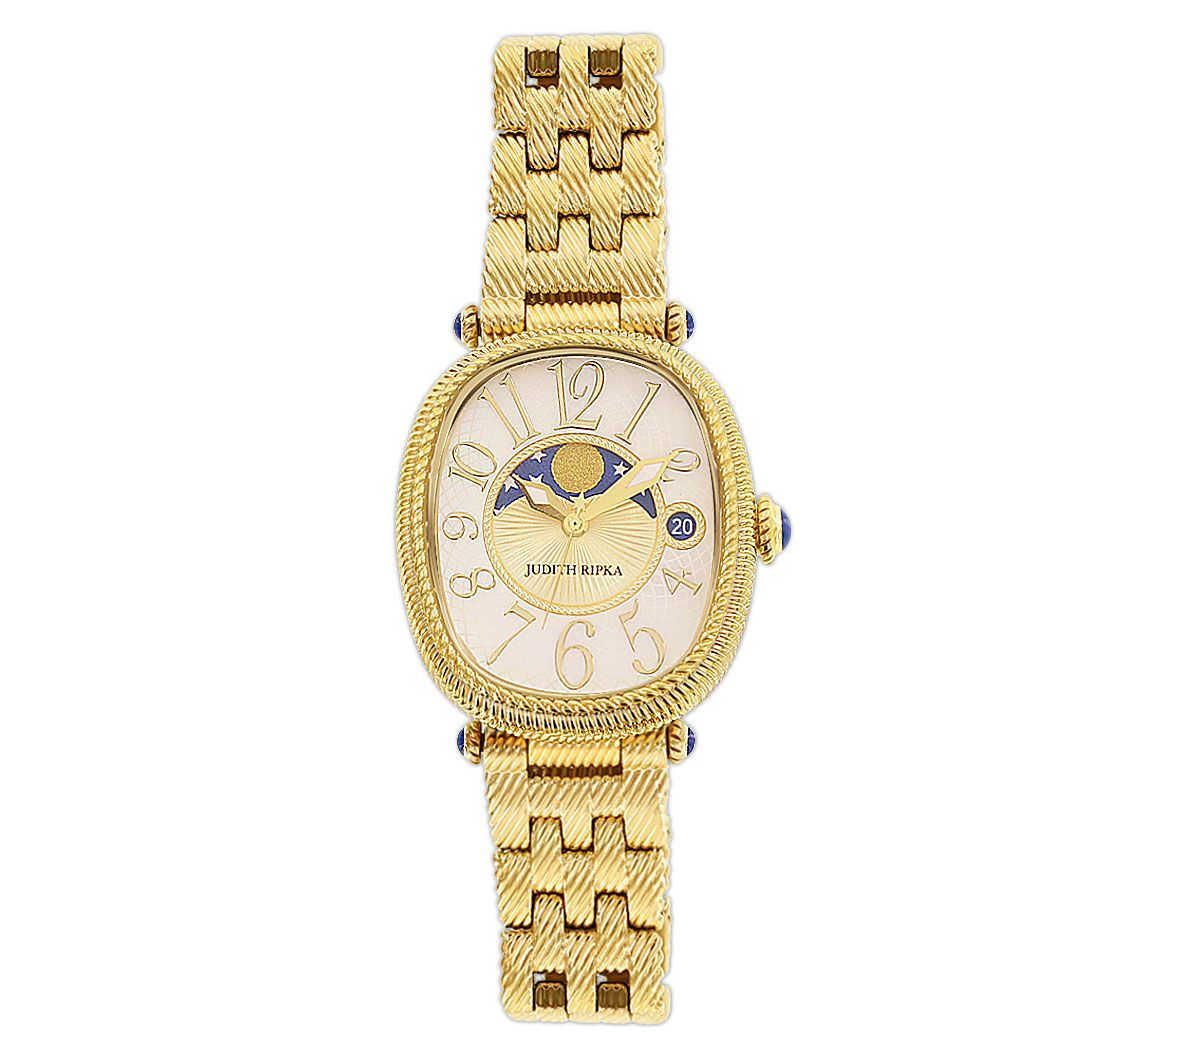 Judith Ripka Goldtone Stainless White Moon Phase Watch - QVC.com